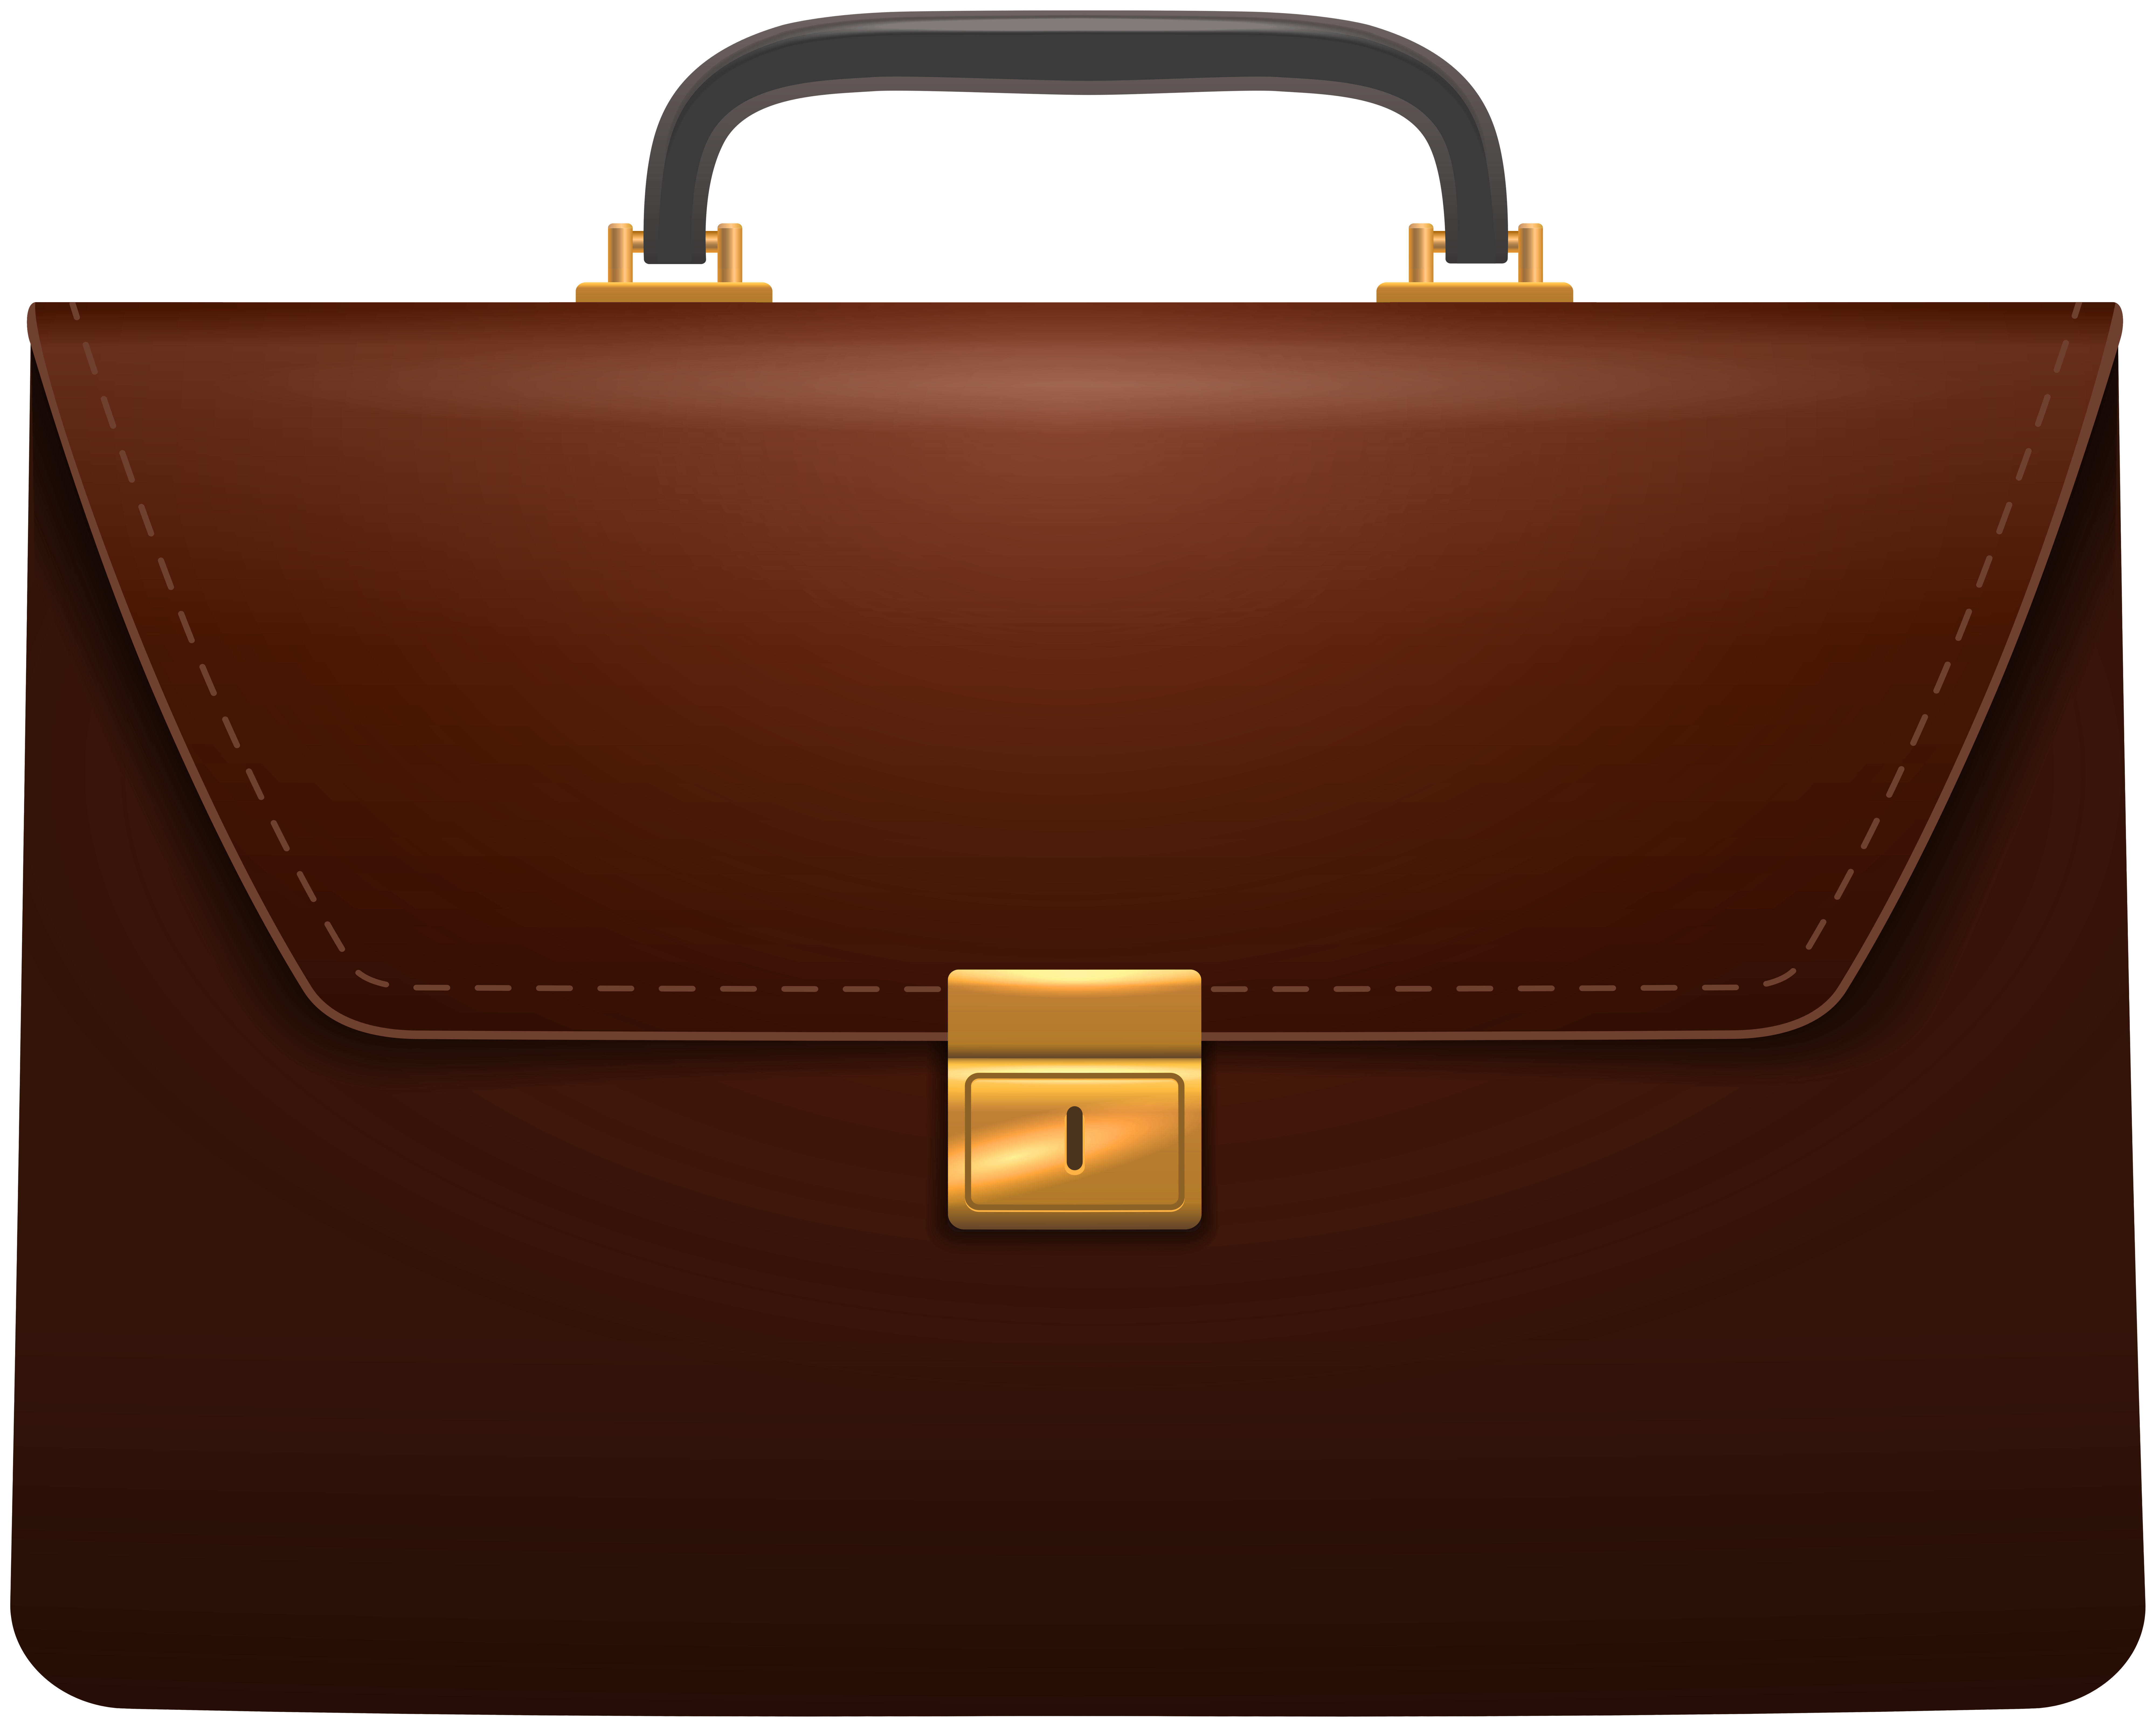 This PNG Image: "Brown Bag PNG Clip Art" is part of "Bag PNG...